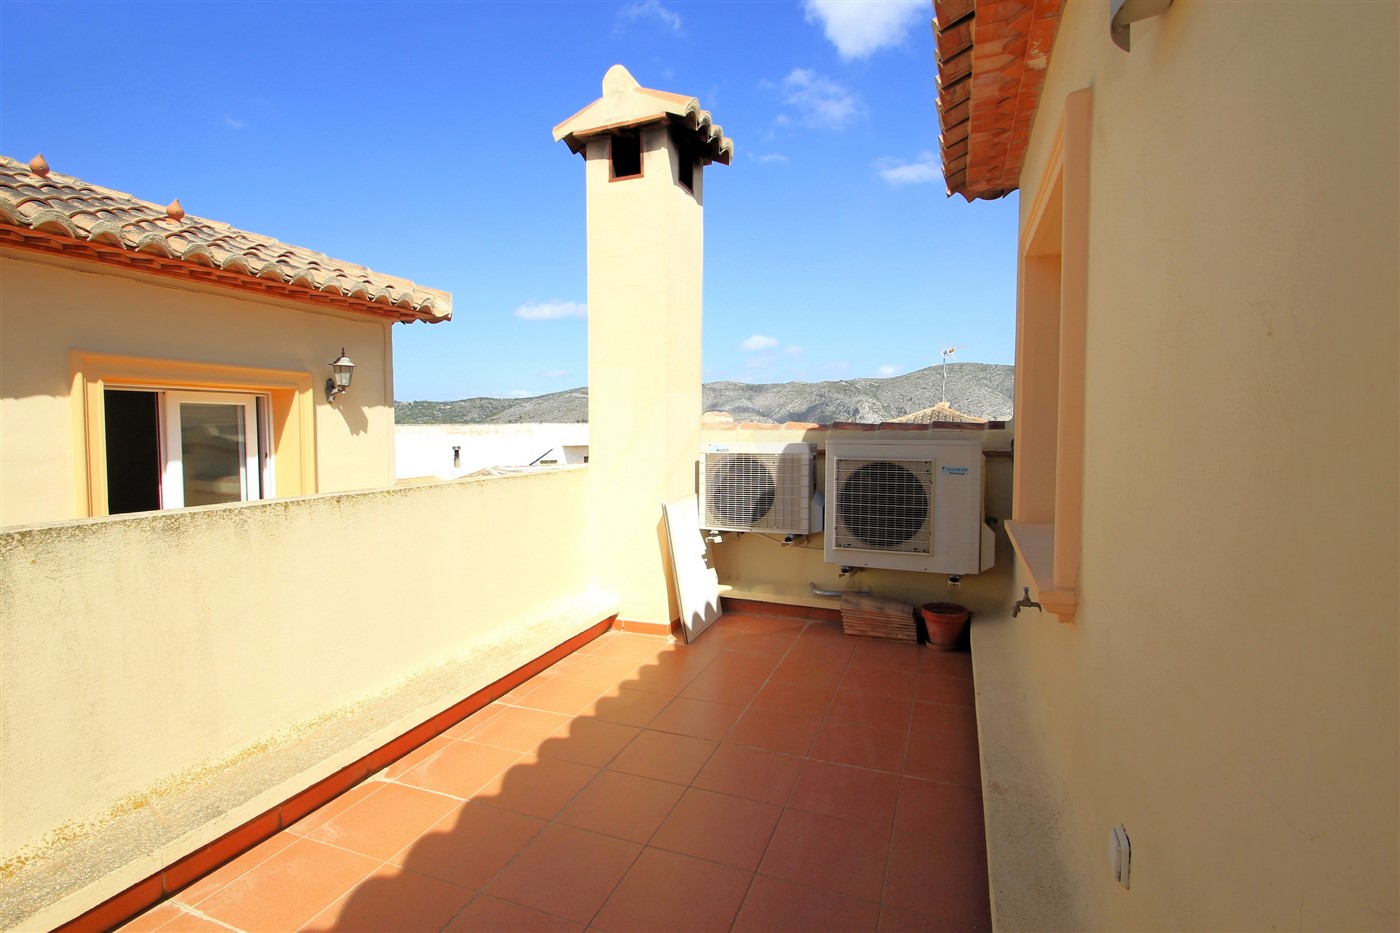 Brand new townhouse for sale in Teulada, Costa Blanca.